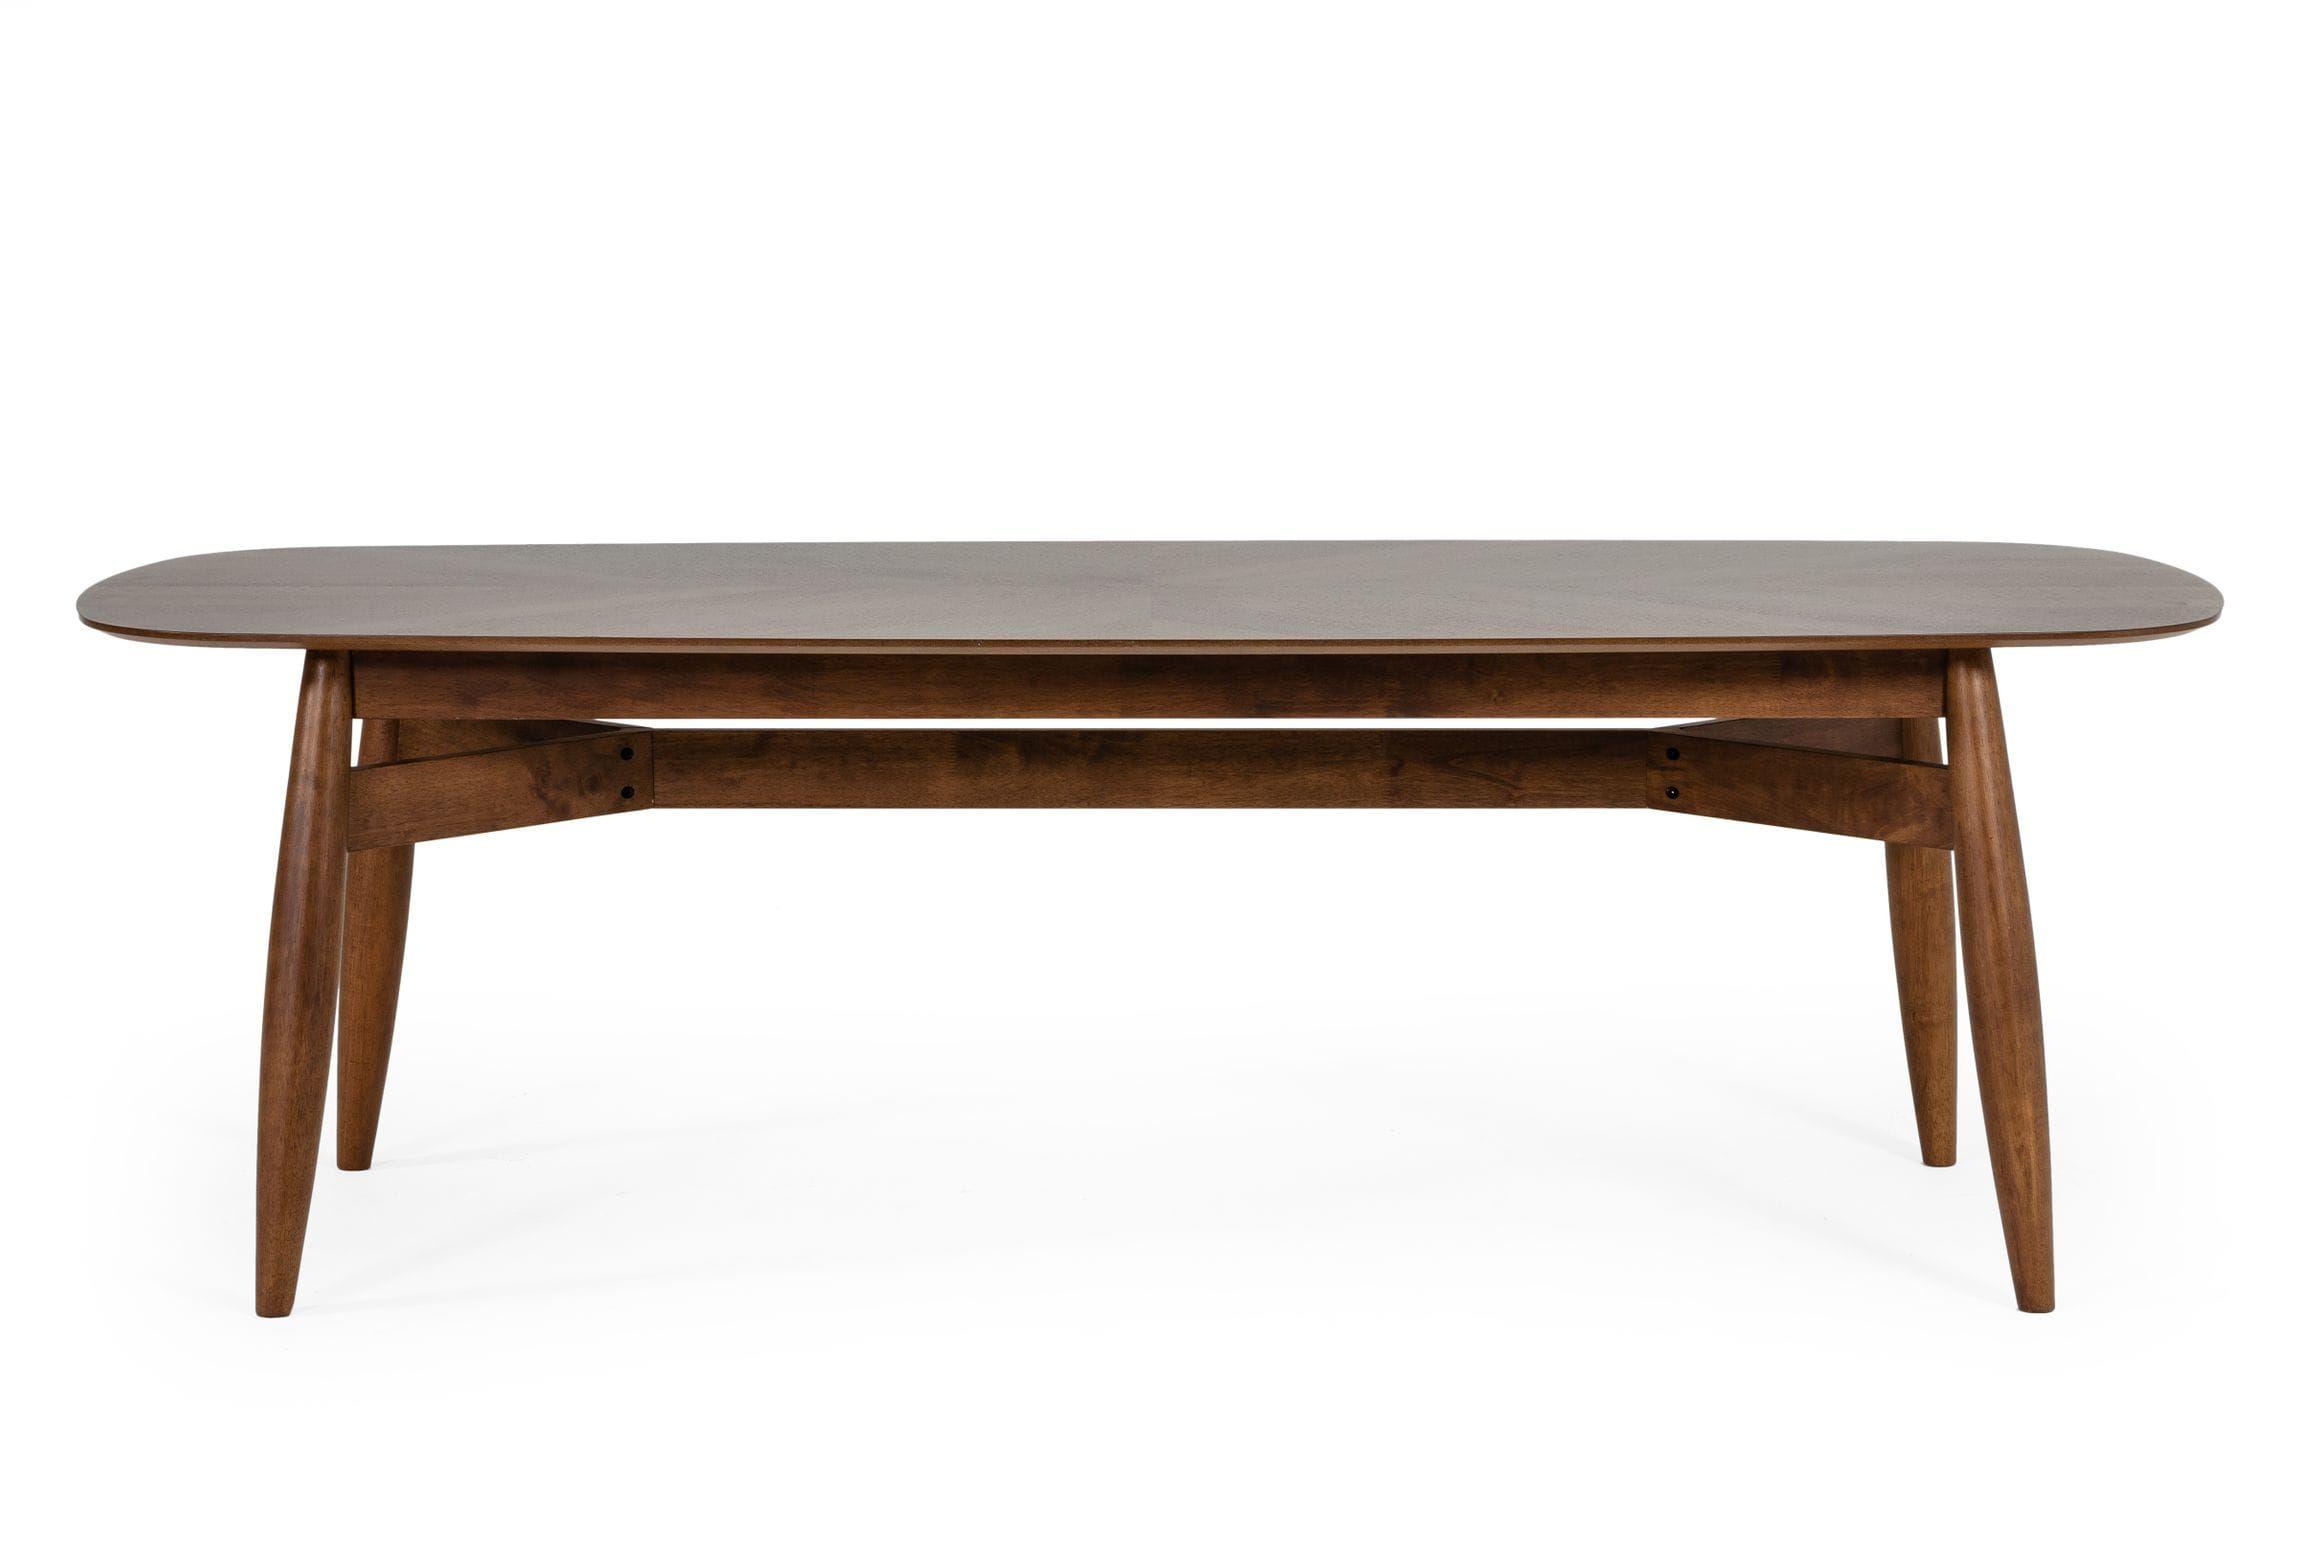 Contemporary, Modern Dining Table Ackley VGMAMIT-8117 in Walnut 